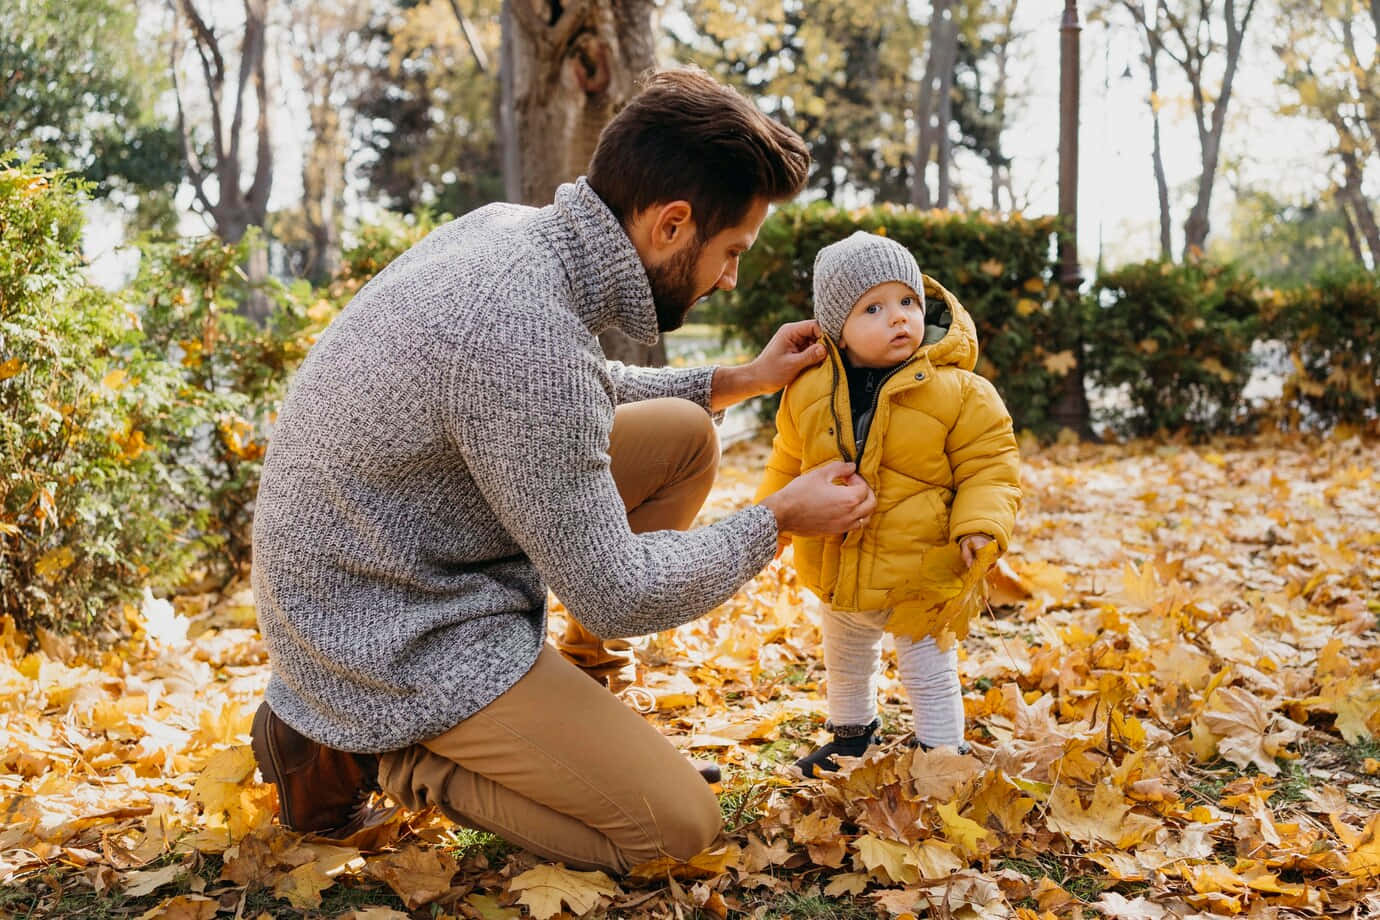 Together as a family, we always make time to enjoy the beauty of fall